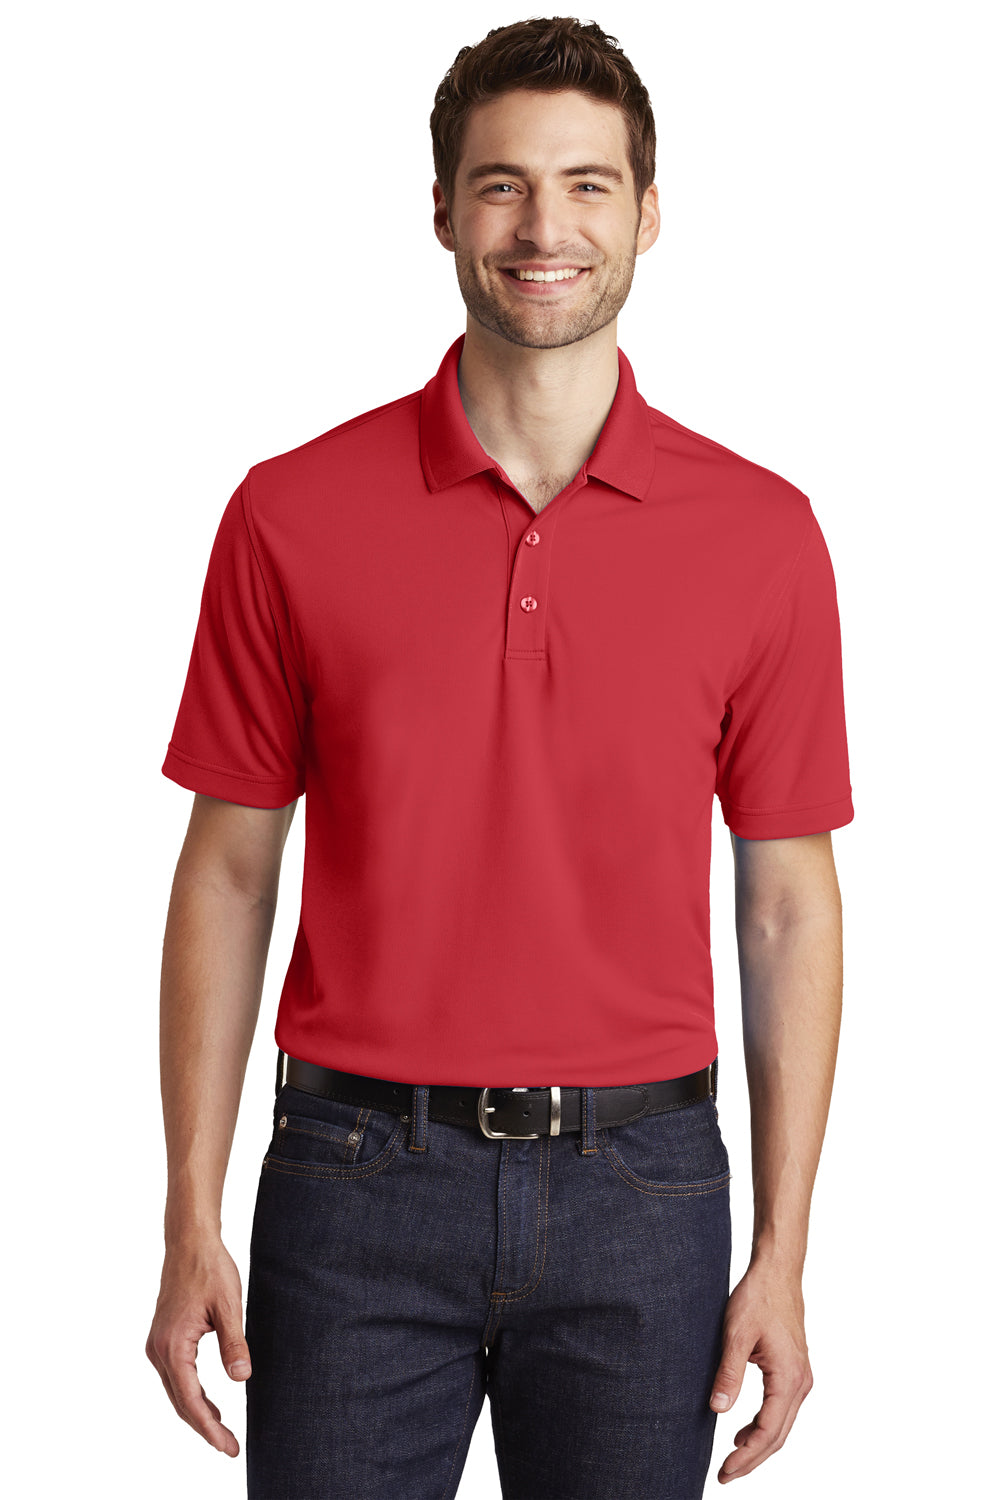 Port Authority K110 Mens Dry Zone Moisture Wicking Short Sleeve Polo Shirt Red Front